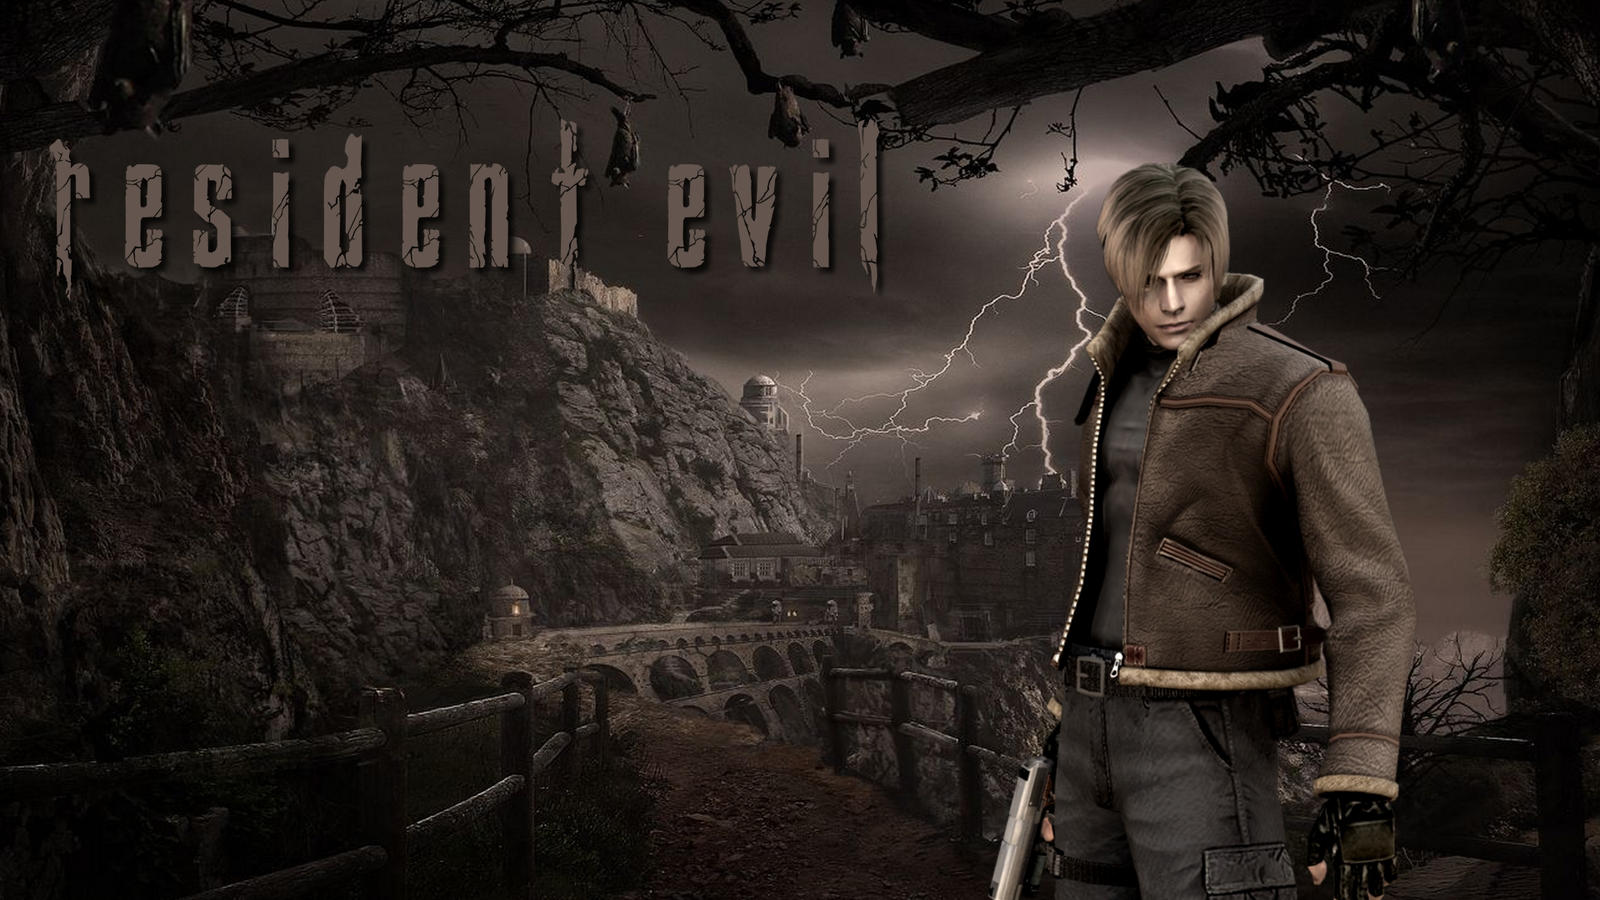 Resident Evil 4 wallpapers for desktop, download free Resident Evil 4  pictures and backgrounds for PC